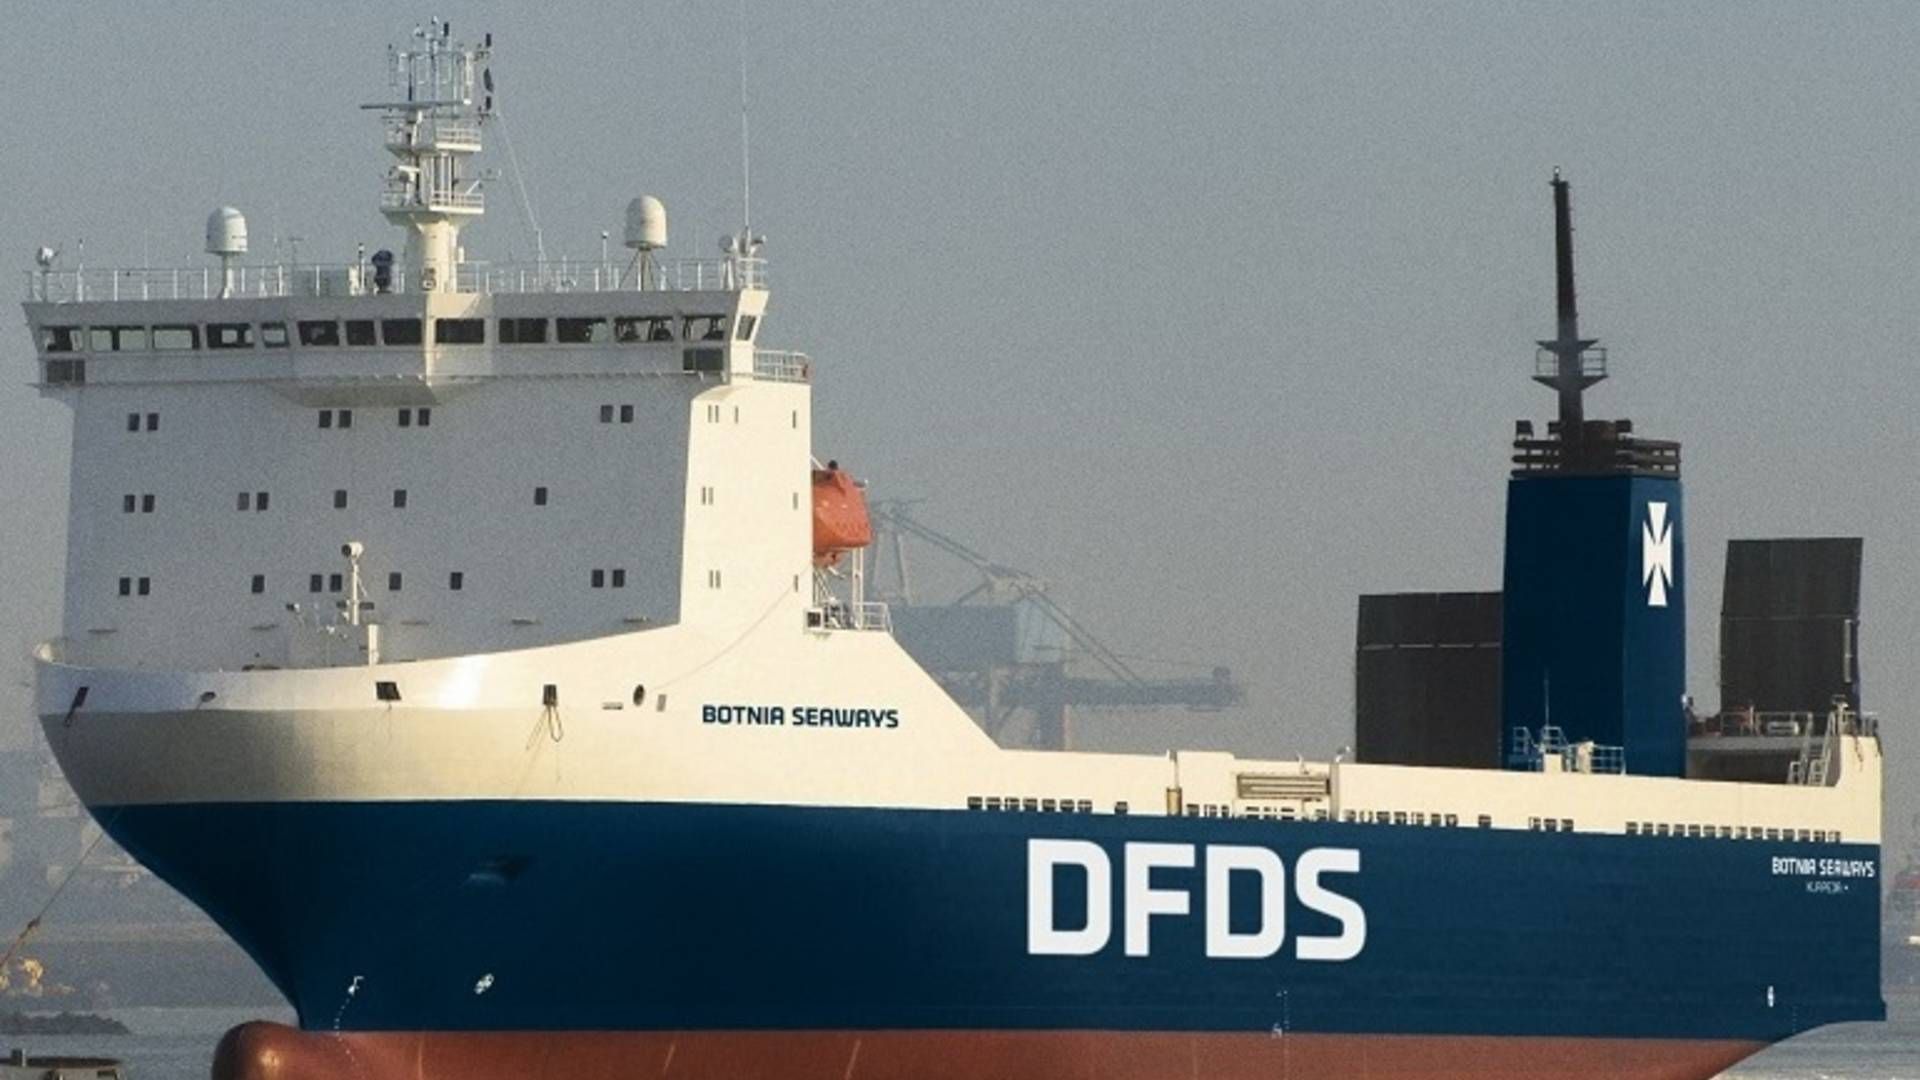 It is DFDS' Botnia Seaways, a RoRo vessel, that is to carry unaccompanied freight. | Photo: PR-FOTO